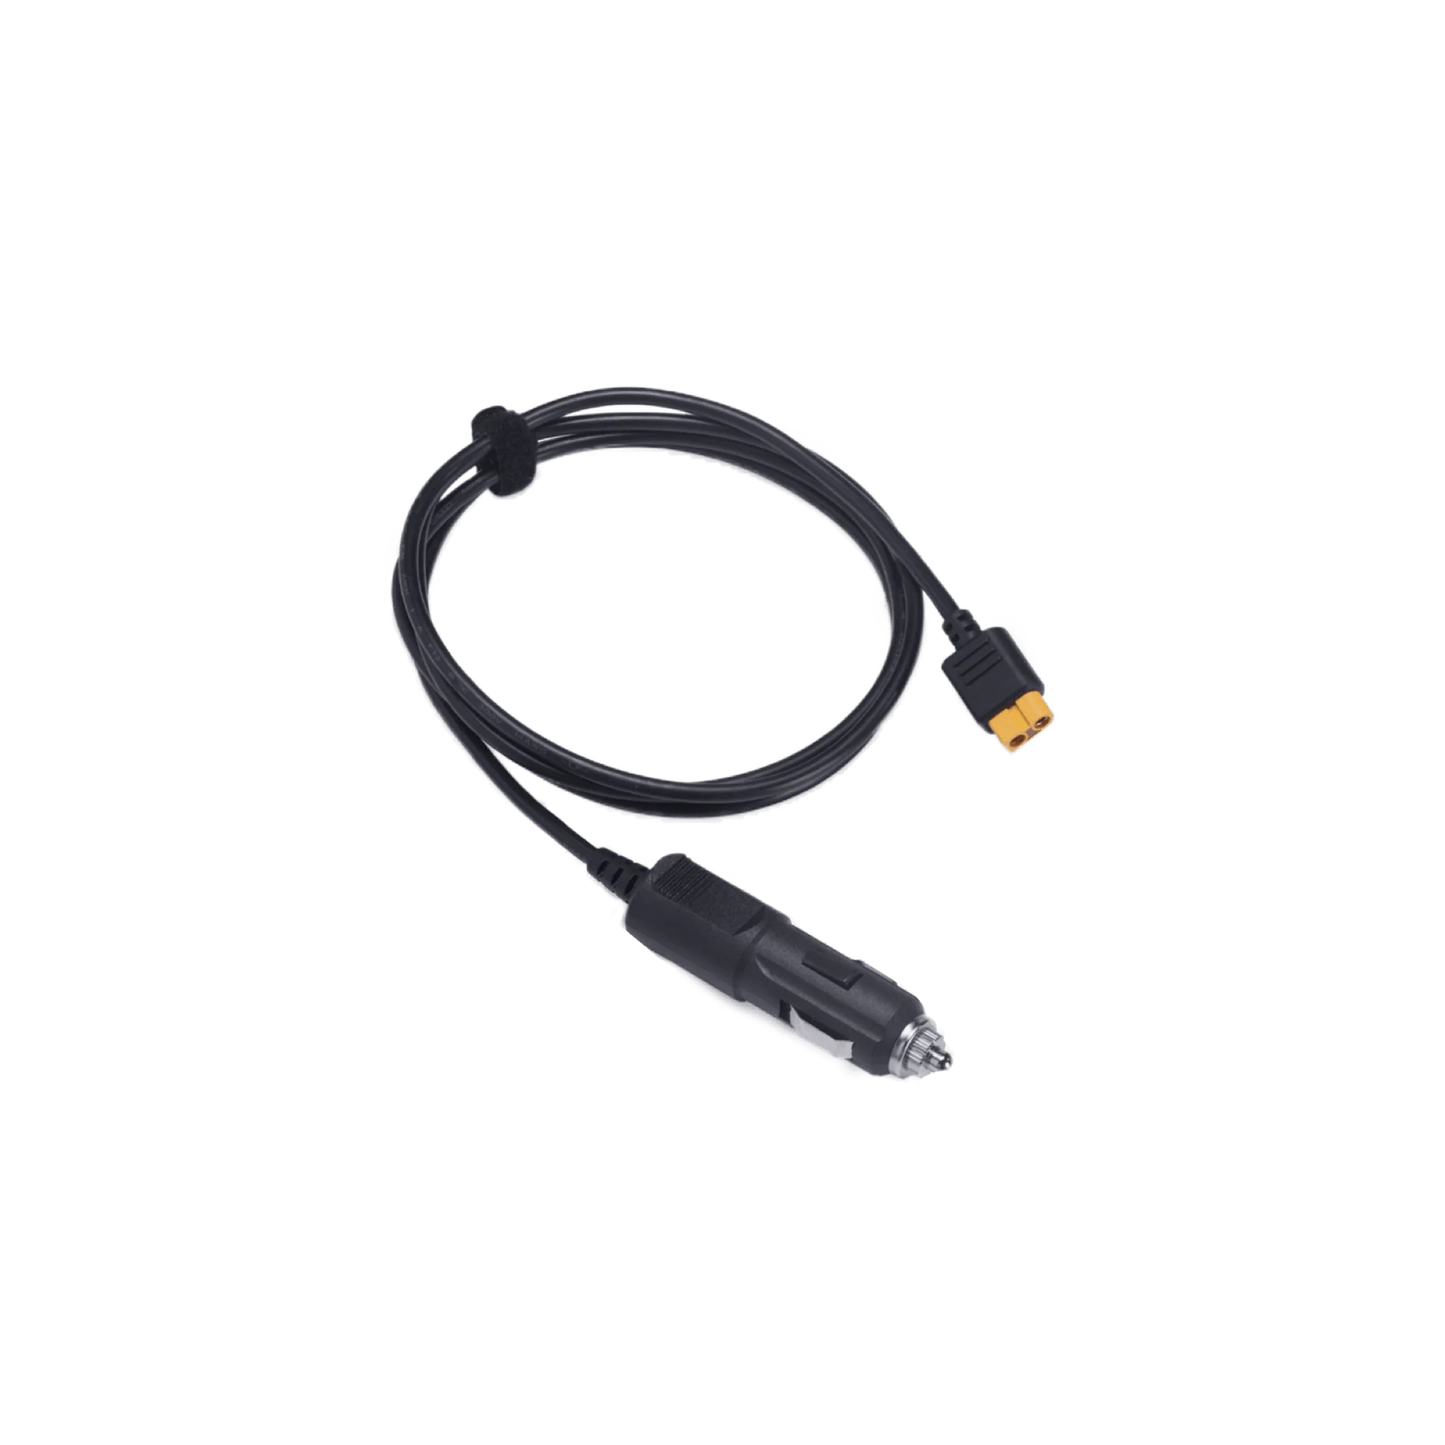 Car Charging Cable (5ft) - EcoFlow